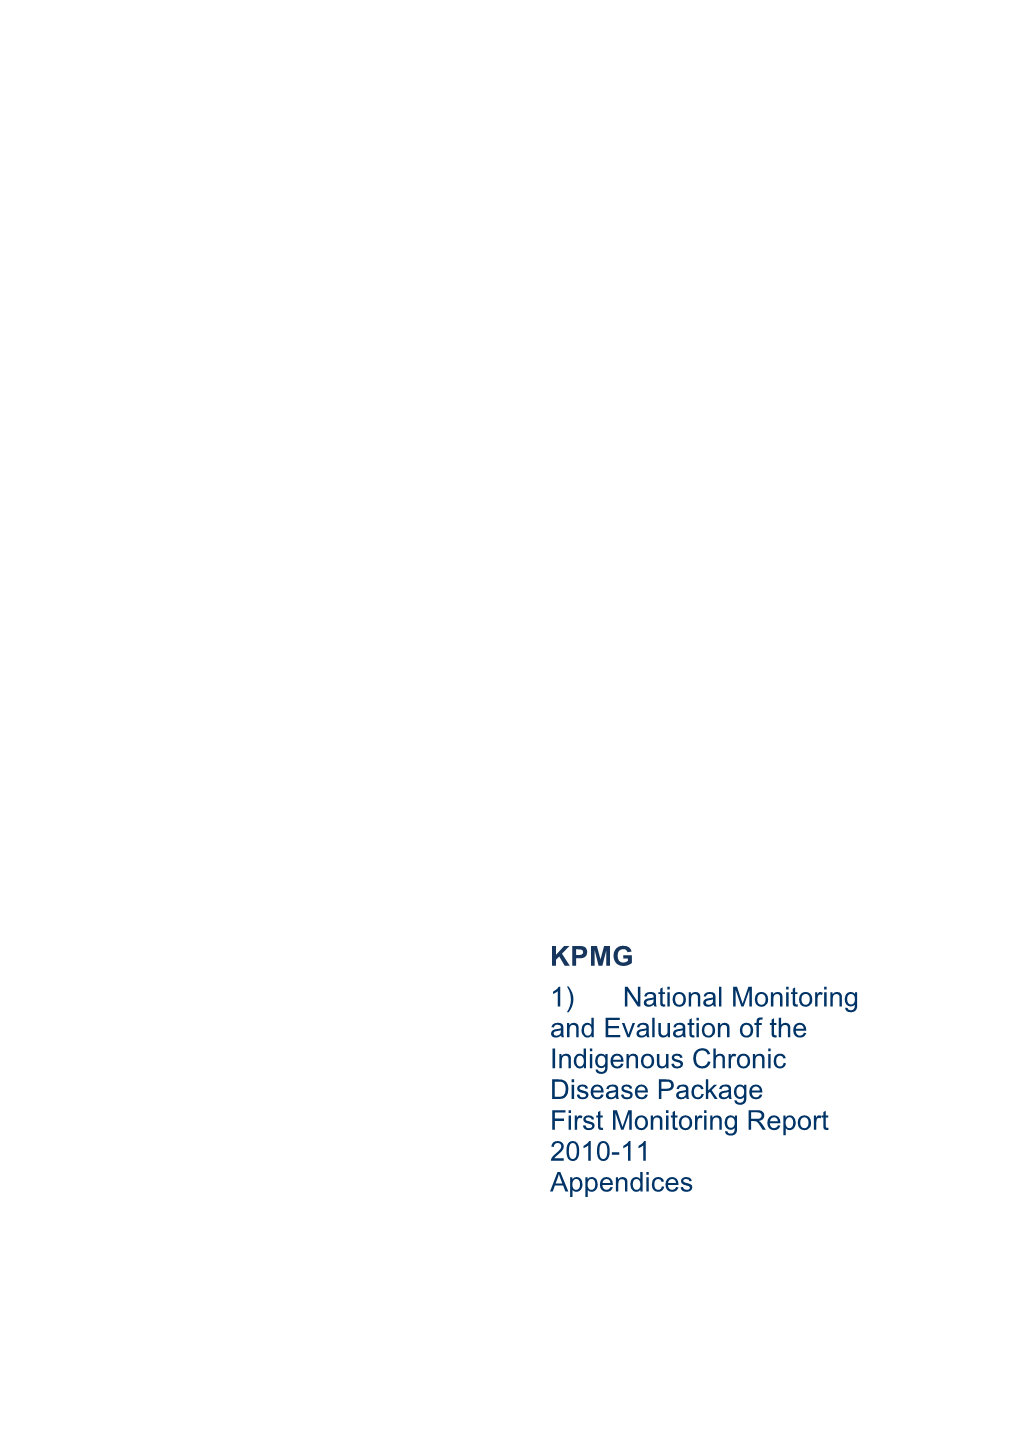 National Monitoring and Evaluation of the Indigenous Chronic Disease Package First Monitoring